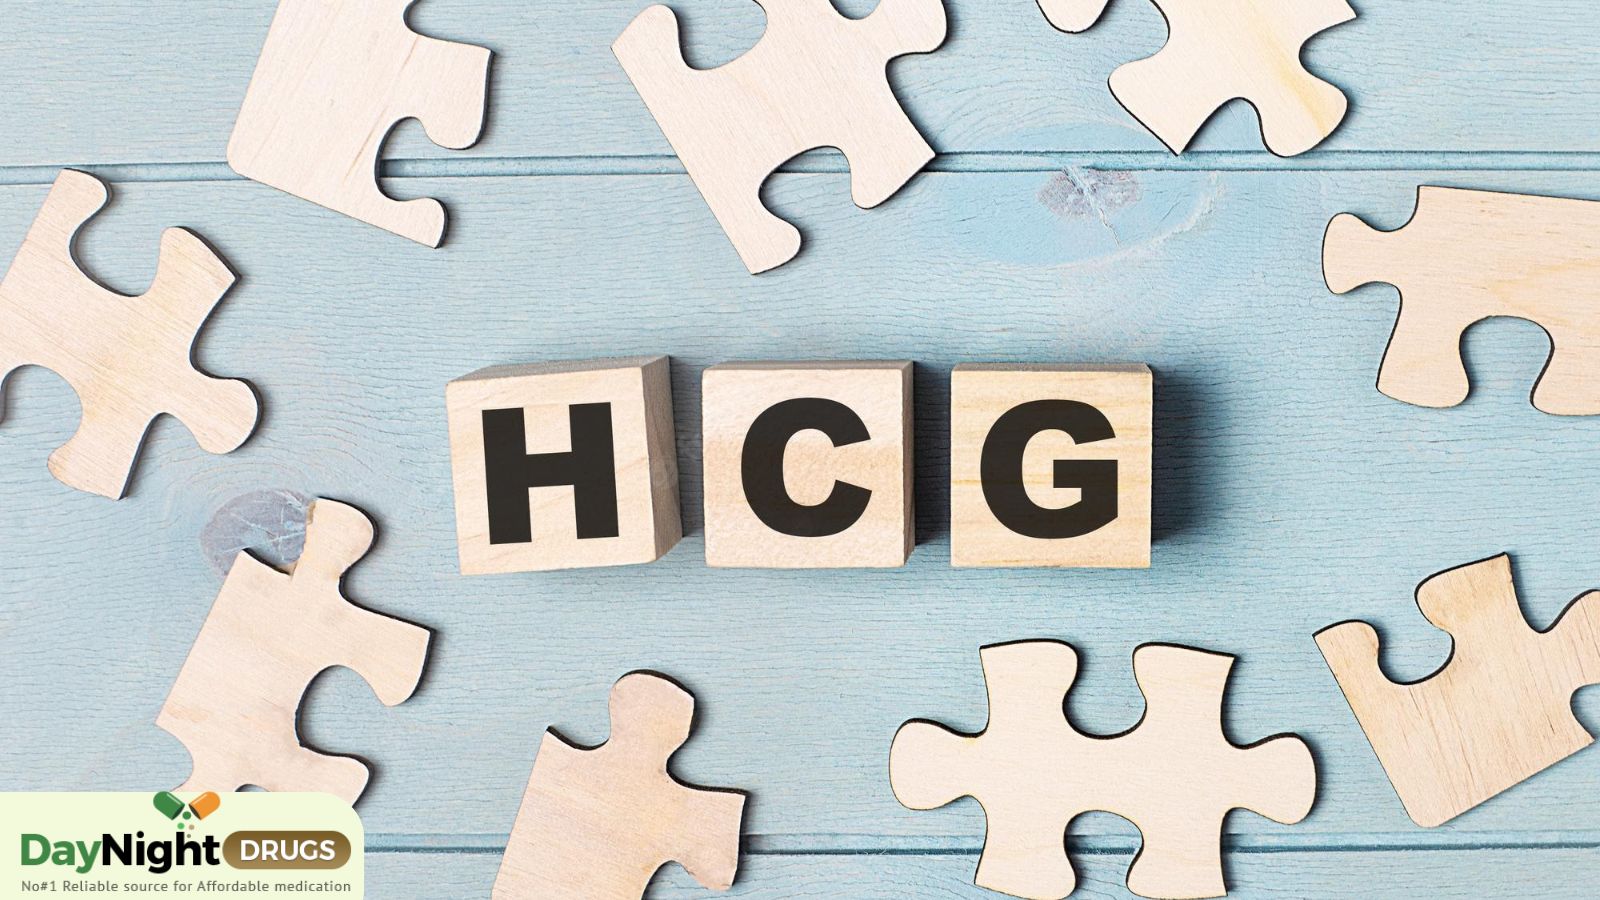 Puzzle and HCG text